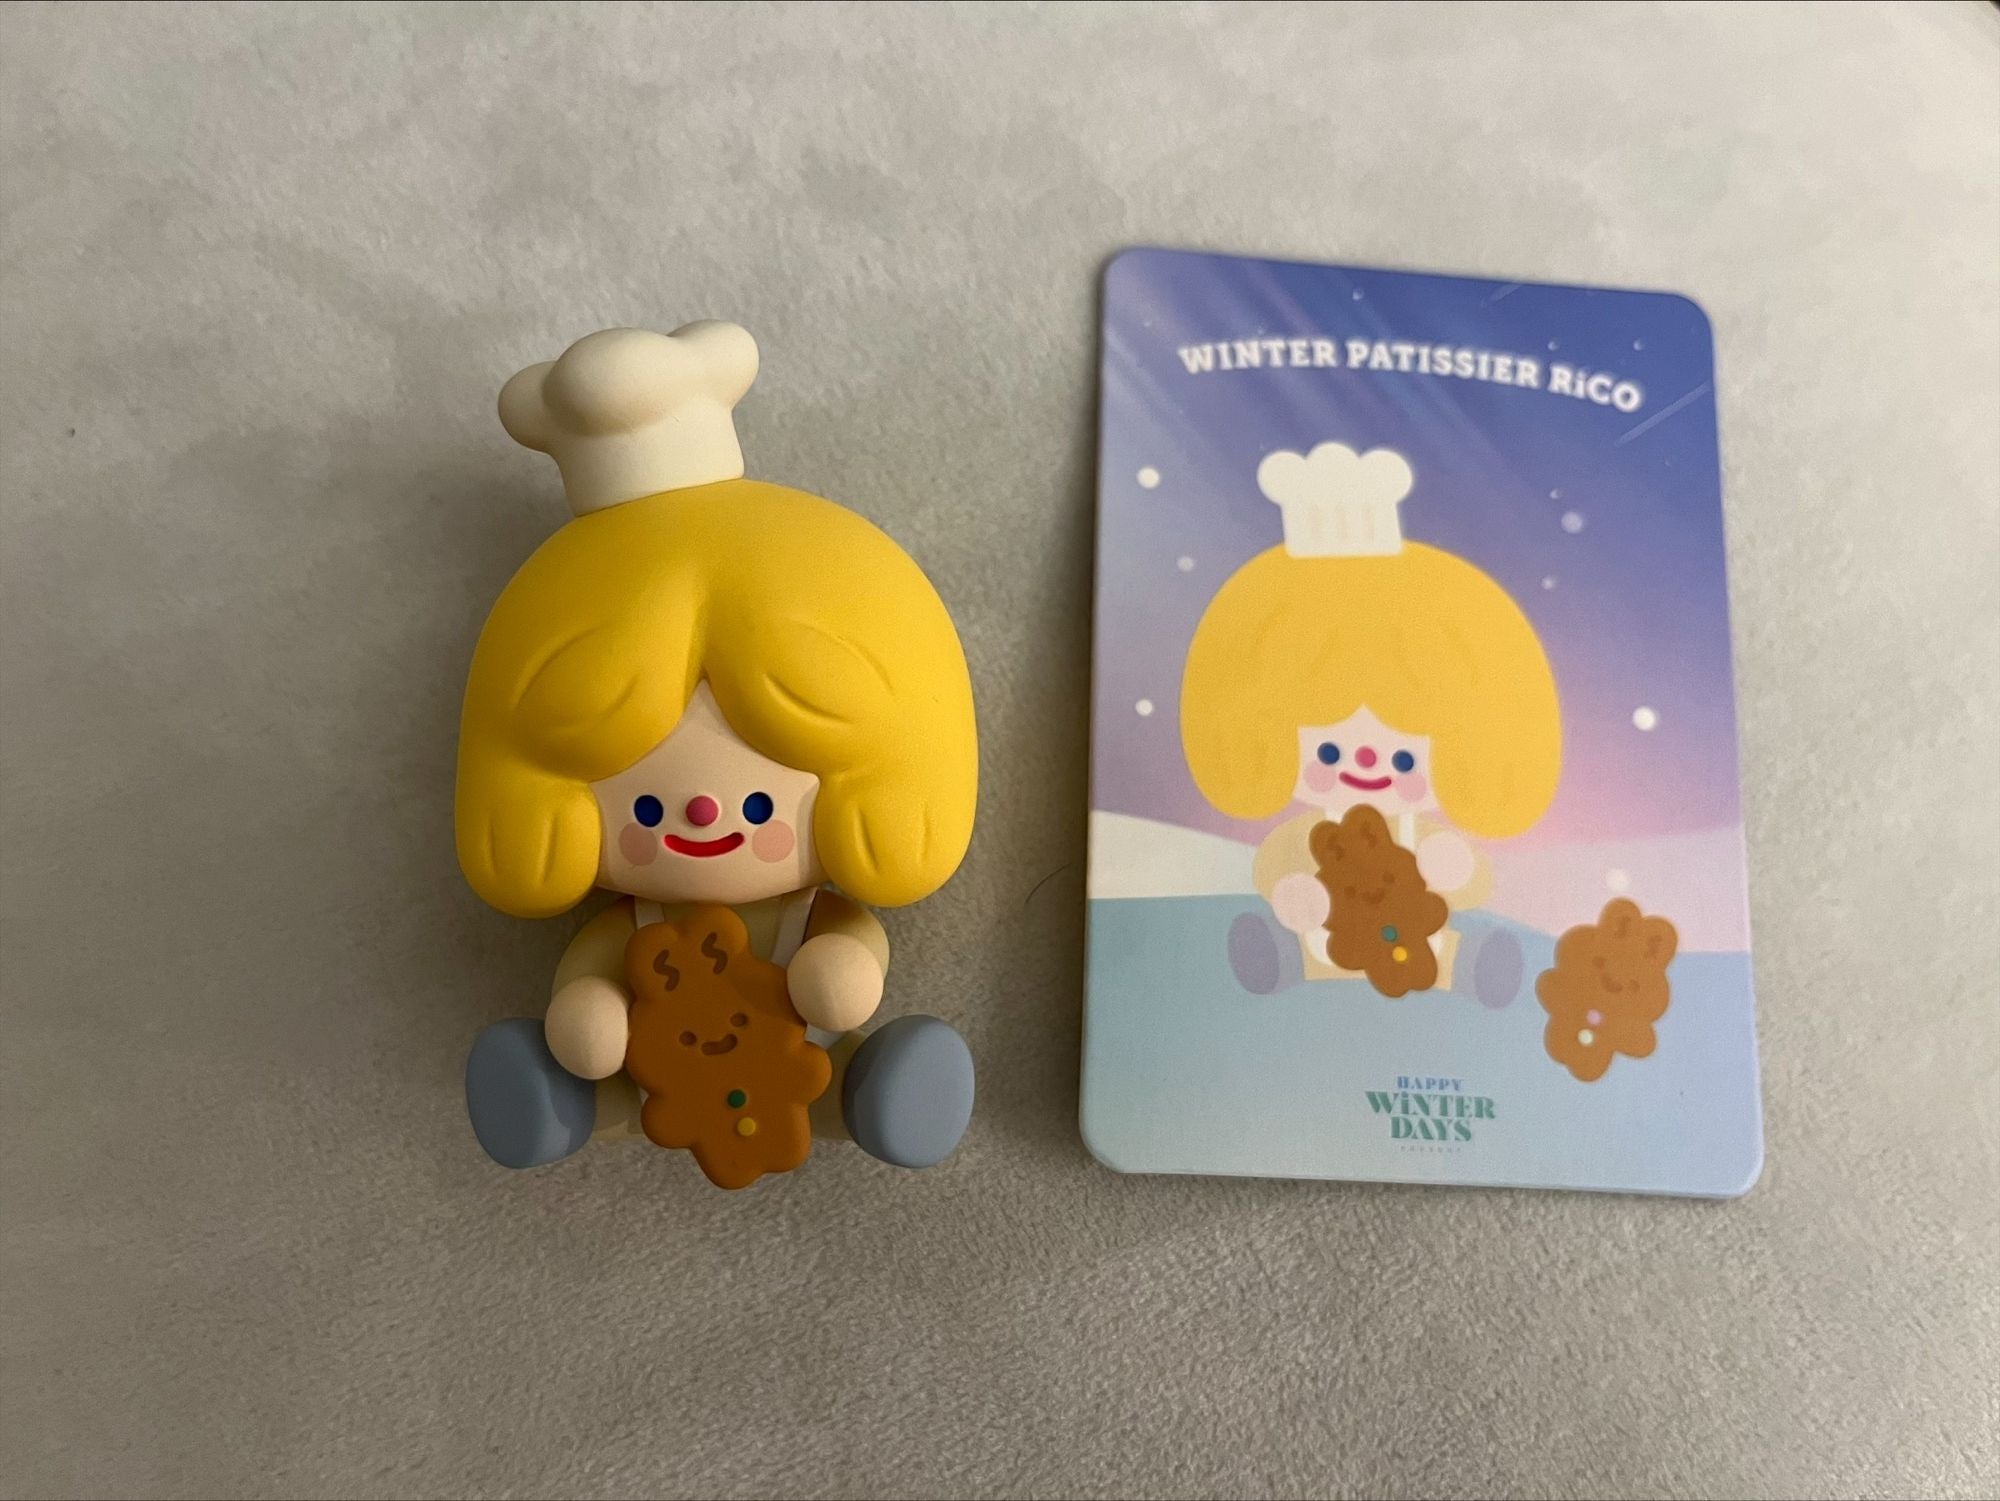 Winter Patissier Rico - RiCO Happy Winter Days Blind Box Series by Rico x Finding Unicorn - 1